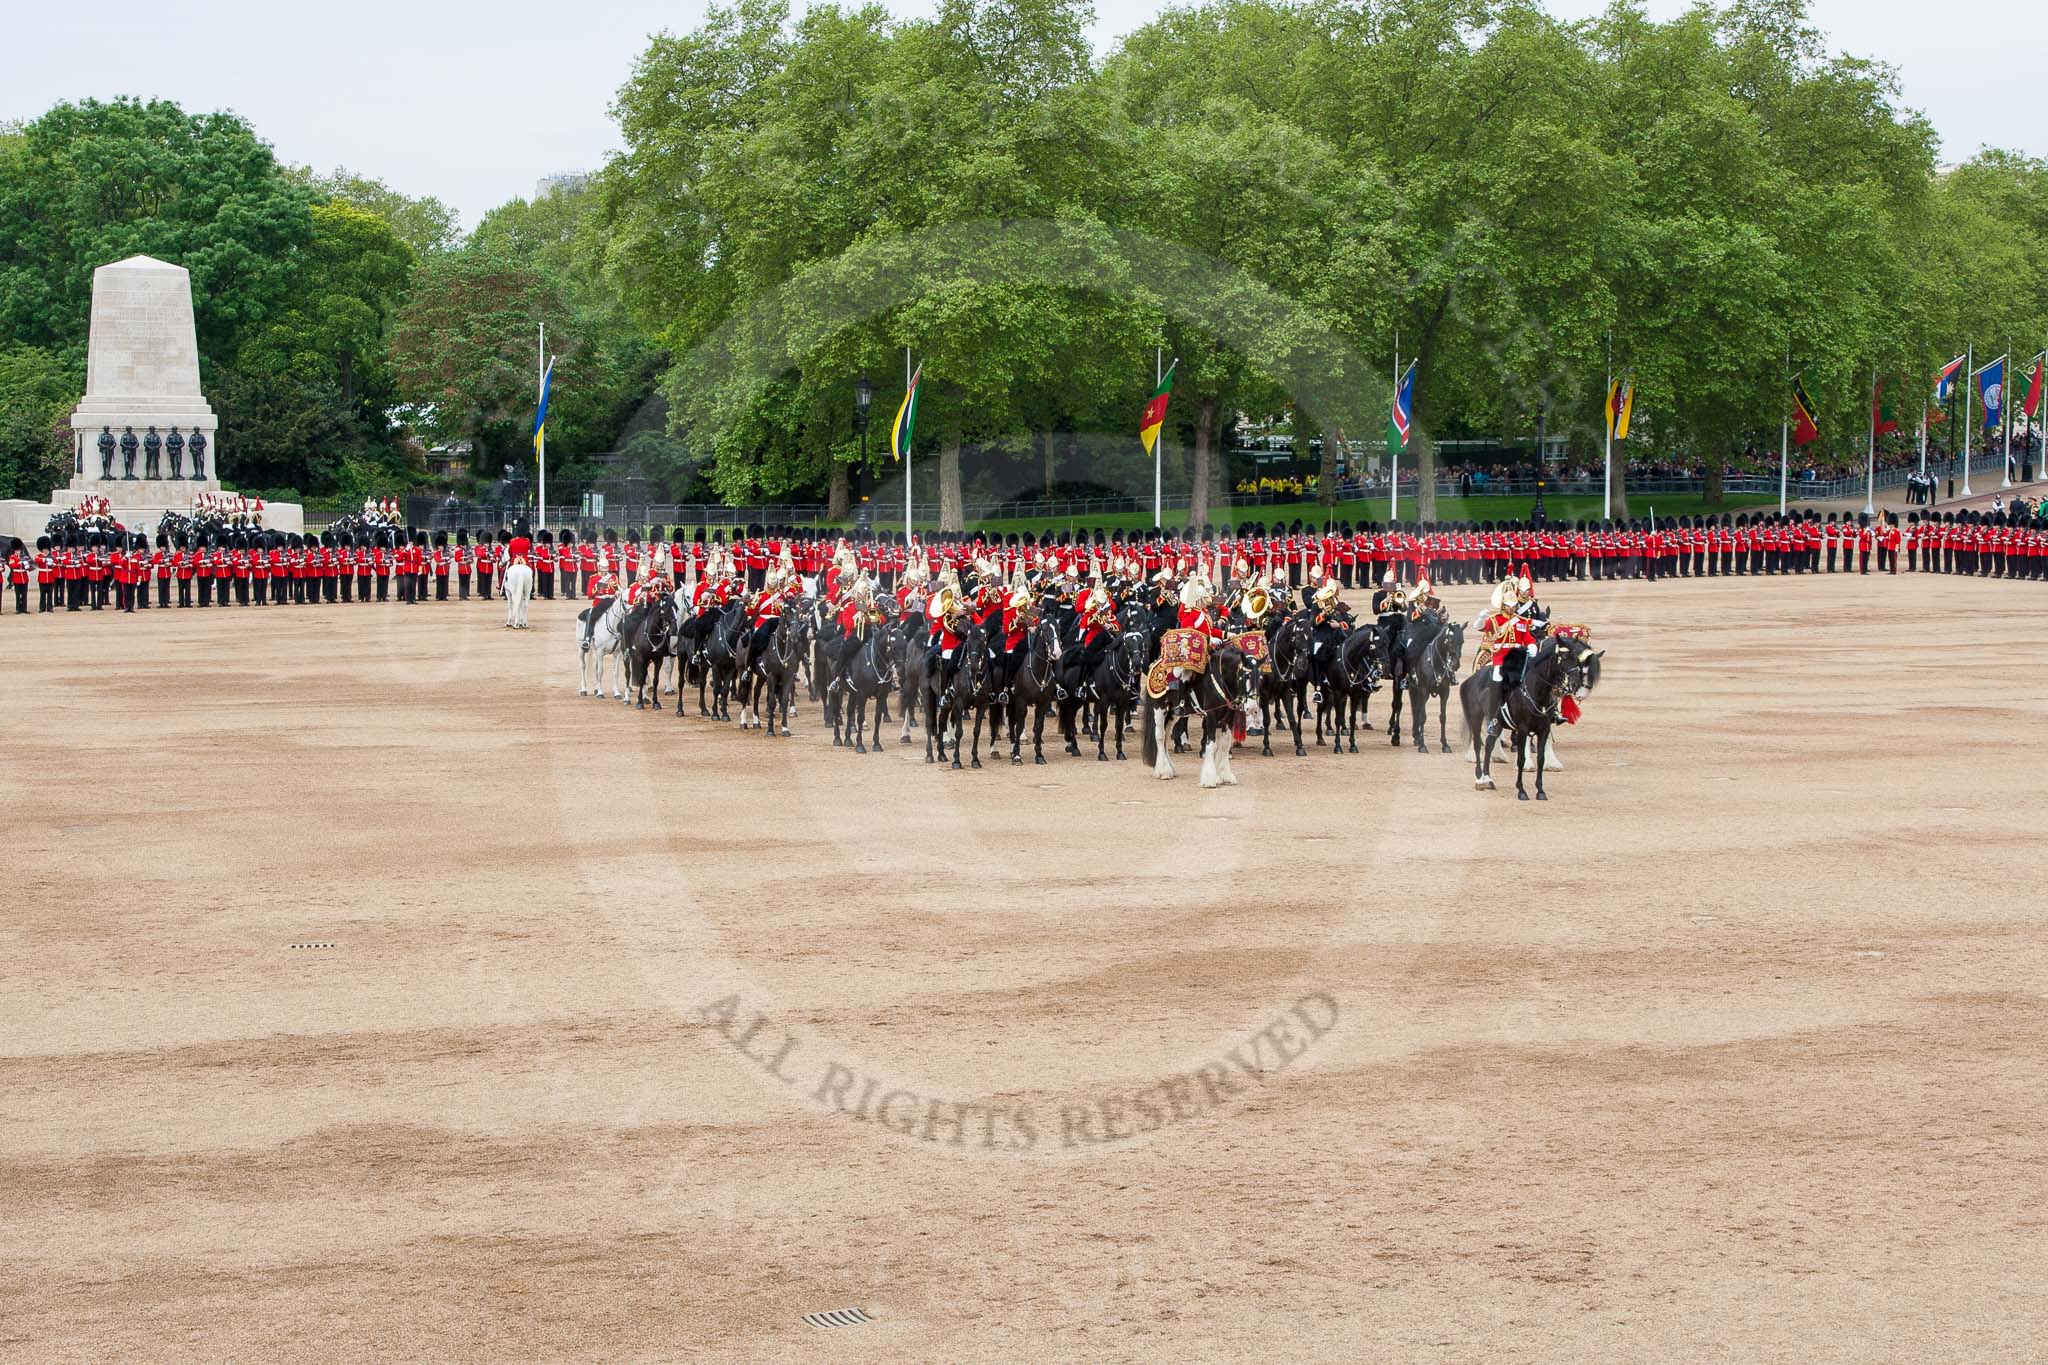 Major General's Review 2013: The Director of Music of the Household Cavalry, Major Paul Wilman, The Life Guards, during the Mounted Troops Ride Past. Behind him the kettle drummer from The Blues and Royals..
Horse Guards Parade, Westminster,
London SW1,

United Kingdom,
on 01 June 2013 at 11:51, image #589